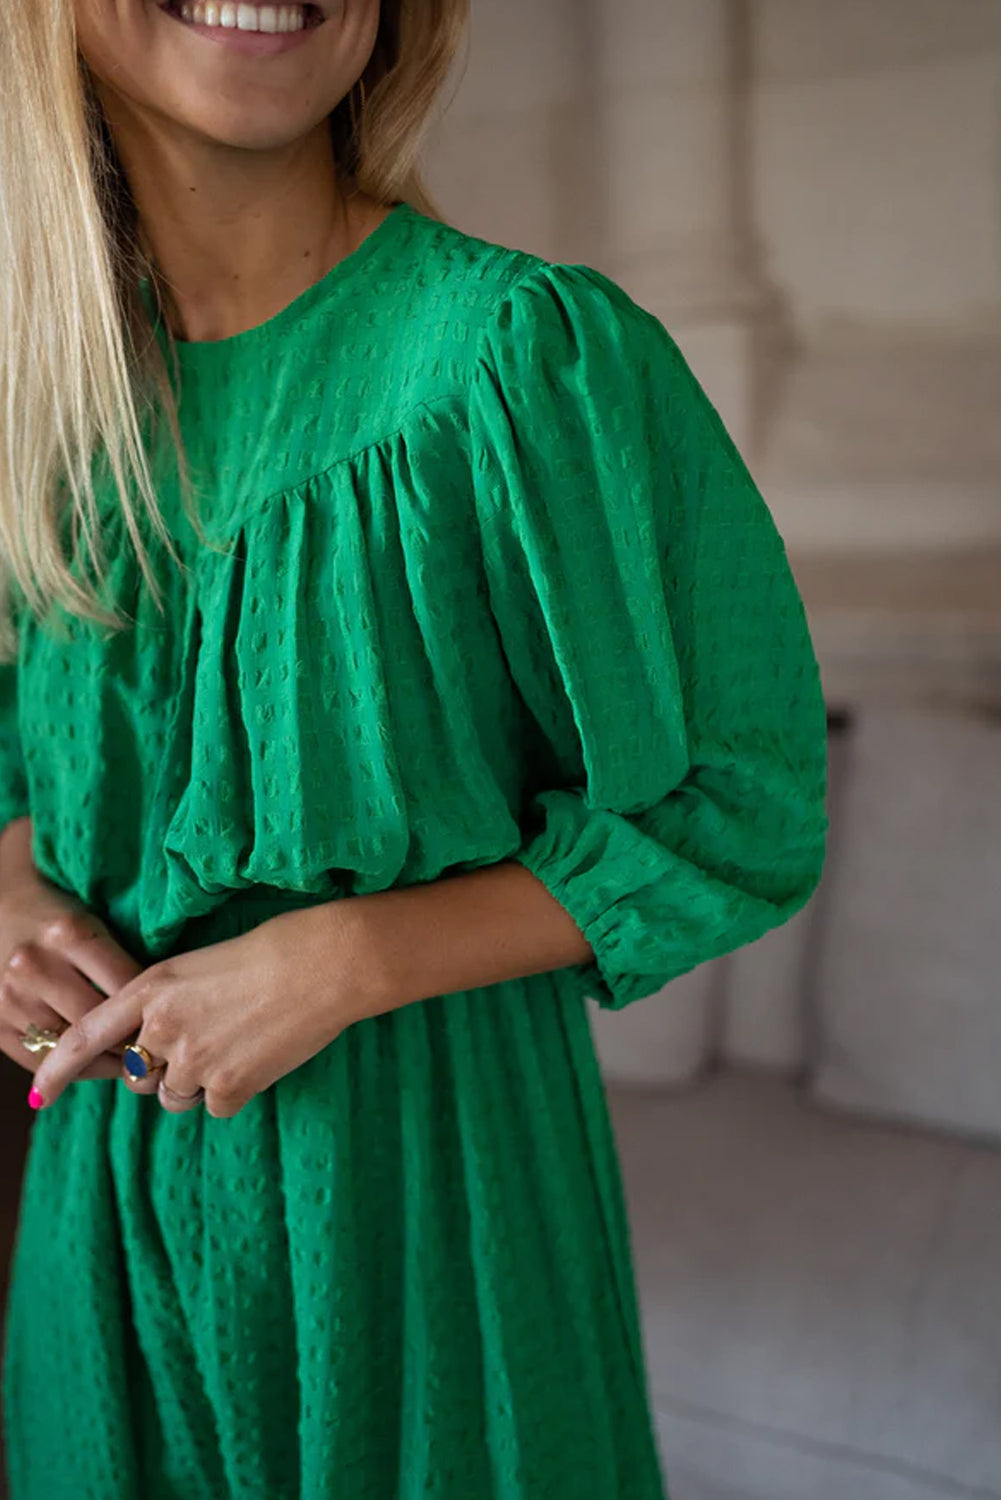 Dark Green Solid Color Round Neck Puff Sleeve Mini Dress